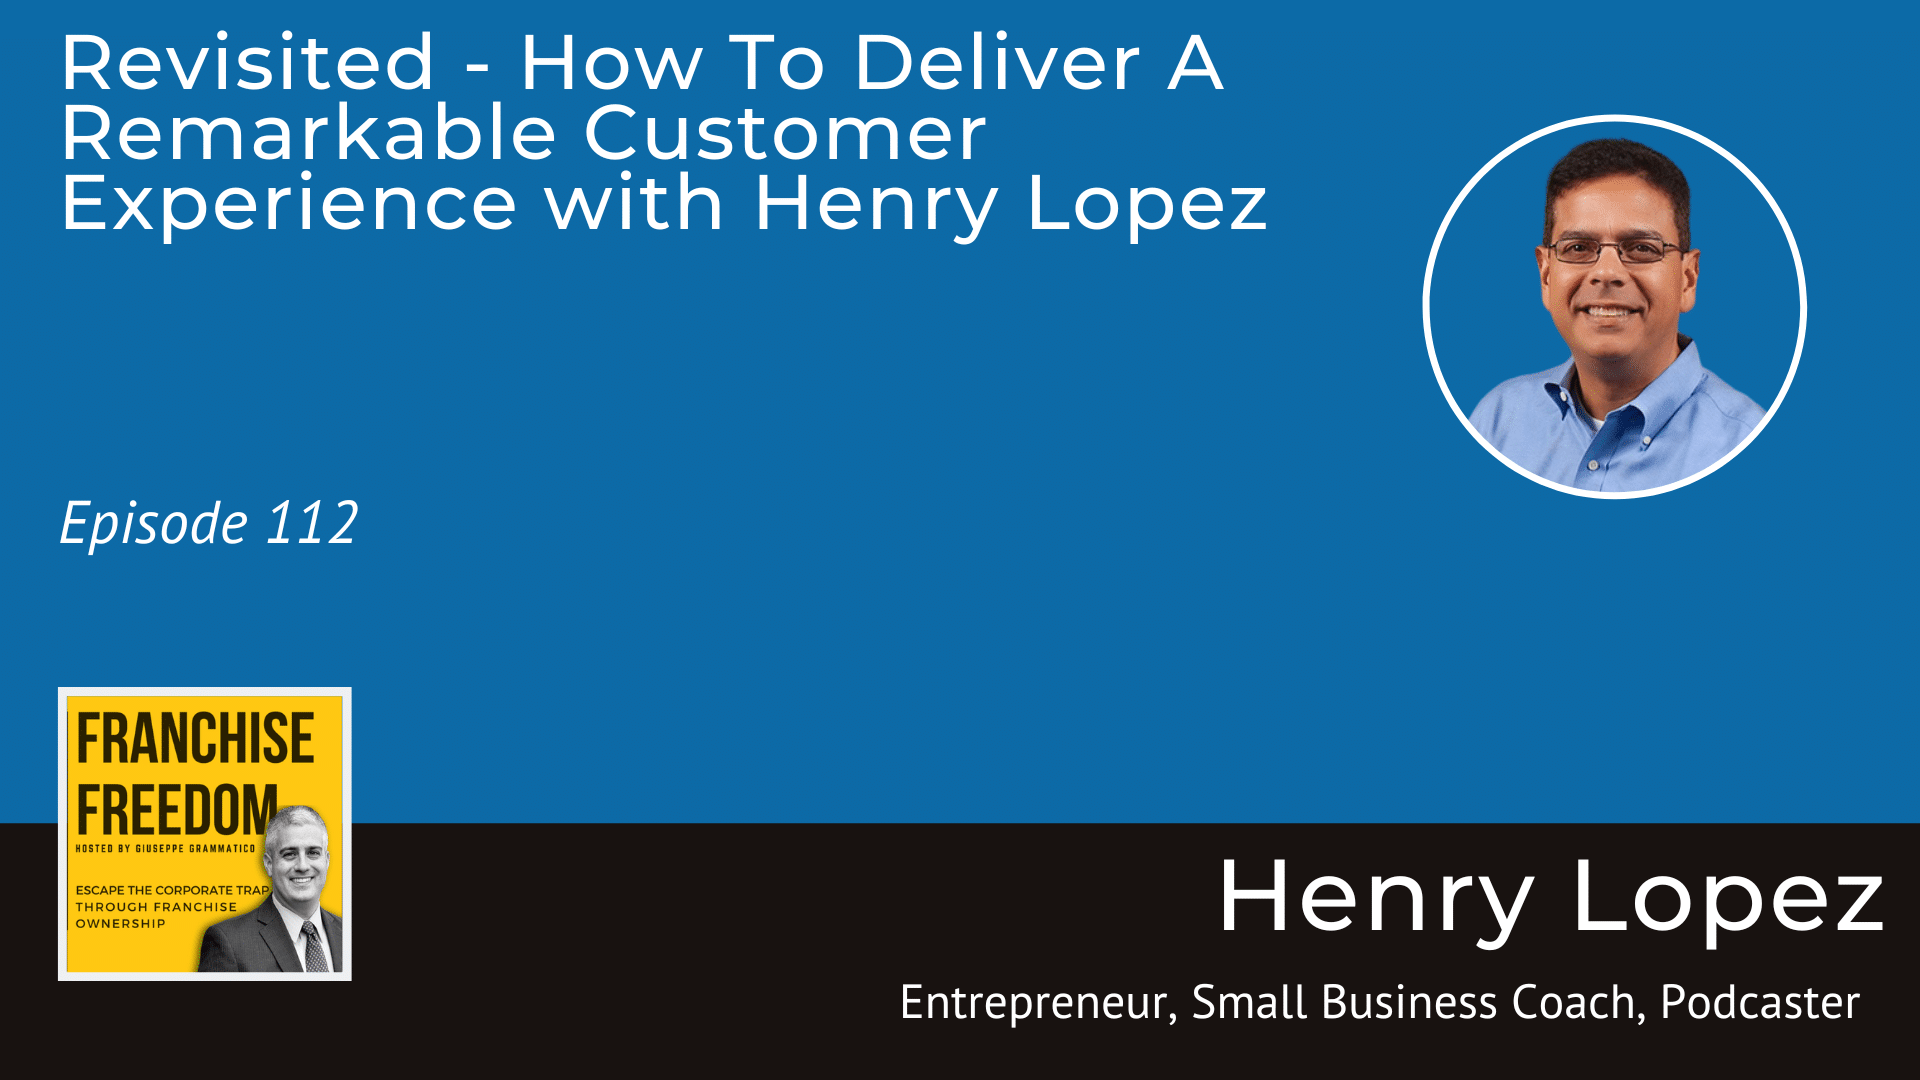 Revisited – How To Deliver A Remarkable Customer Experience with Henry Lopez